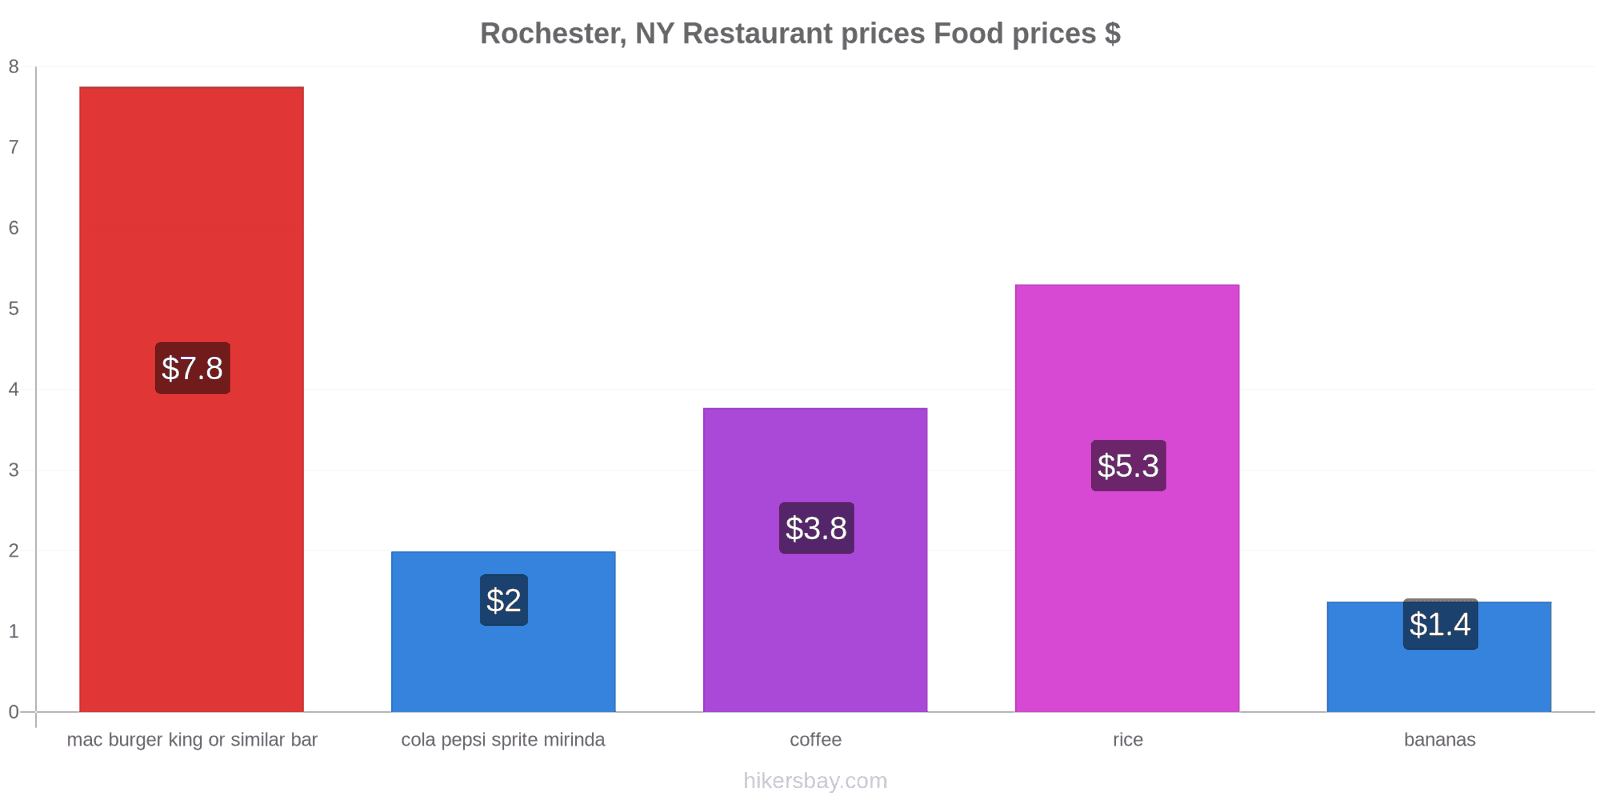 Rochester, NY price changes hikersbay.com